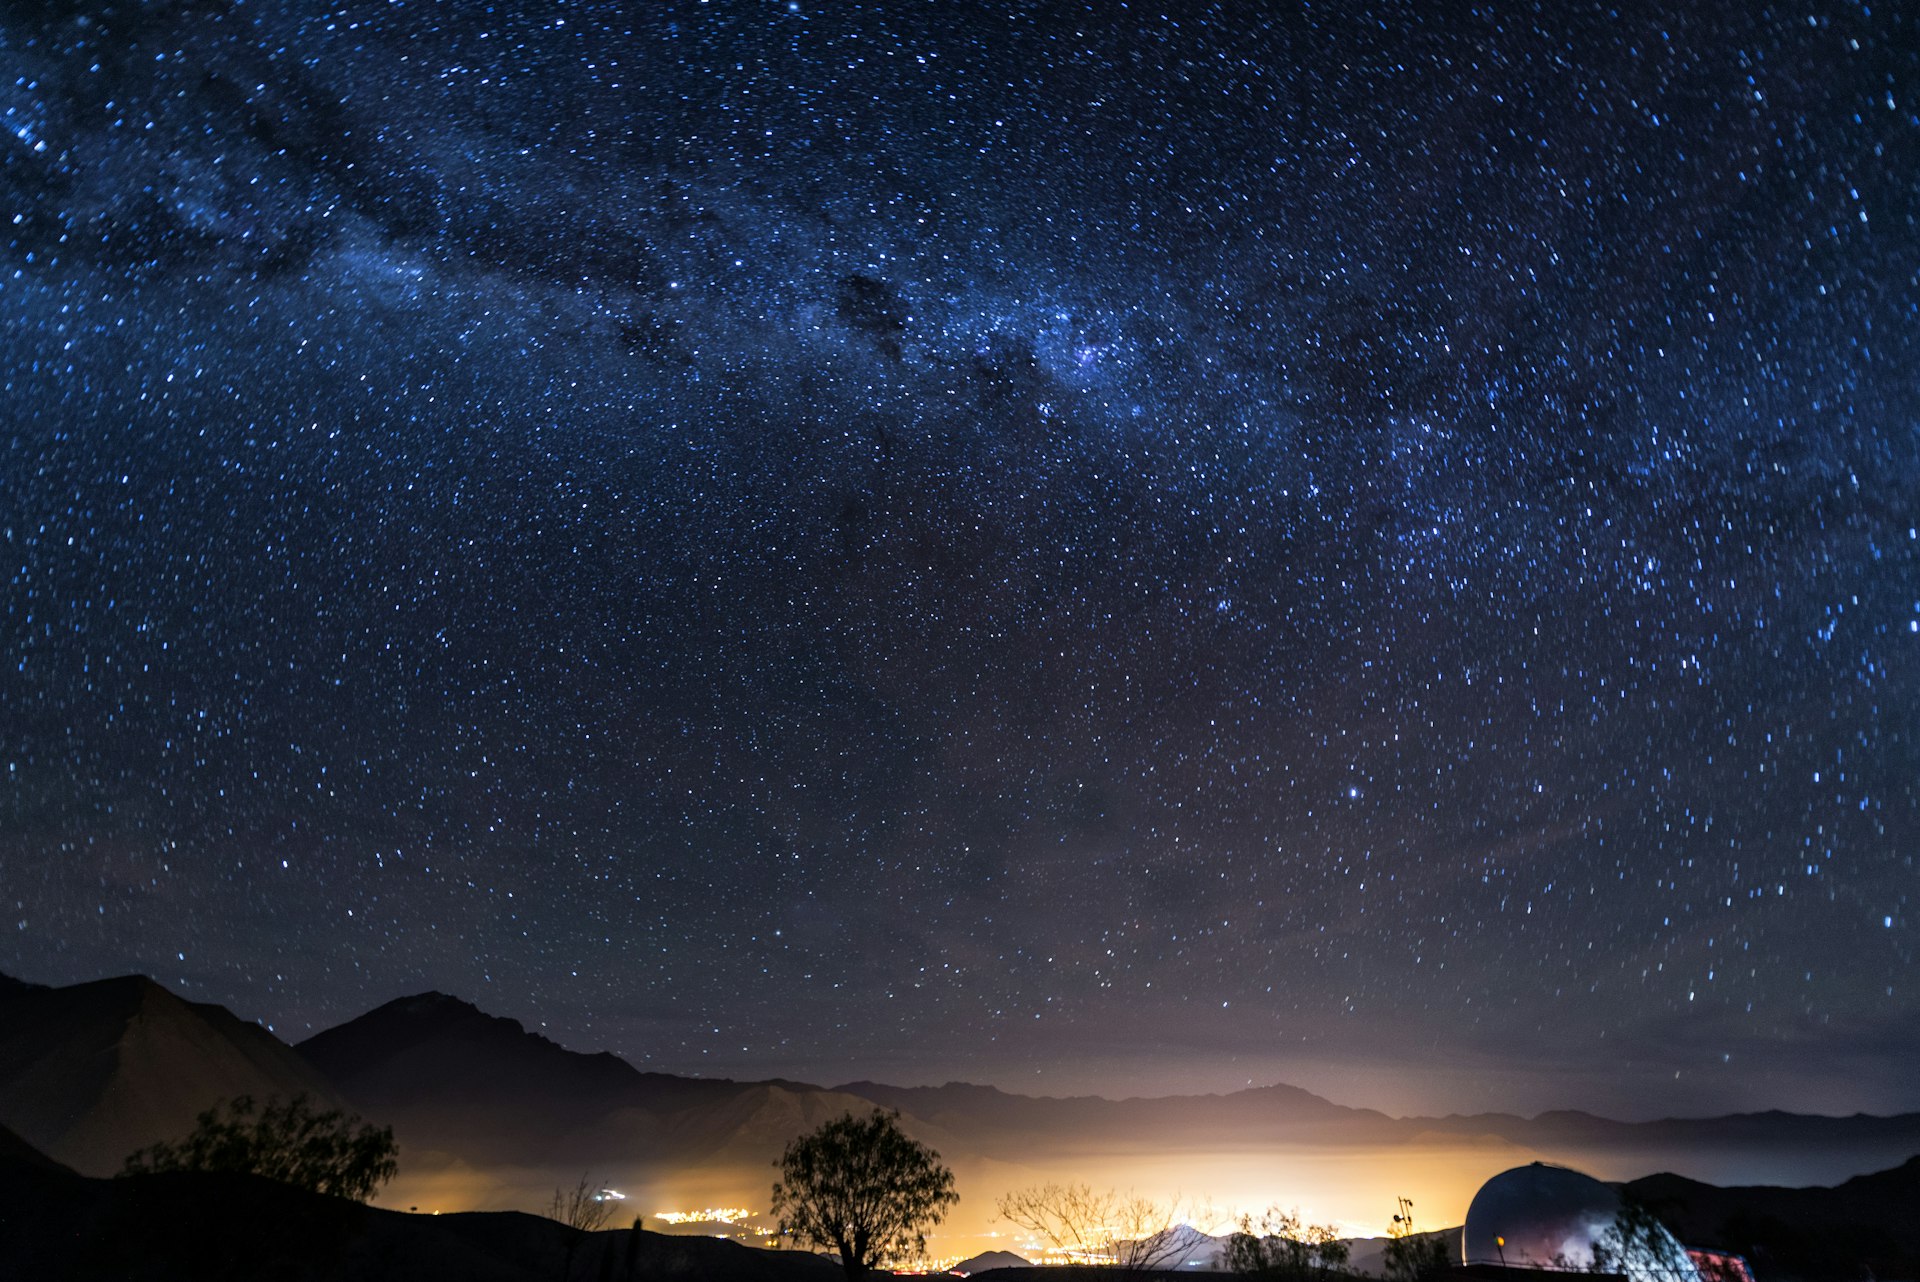 Stars seen at night in the sky over Vicuna, Chile